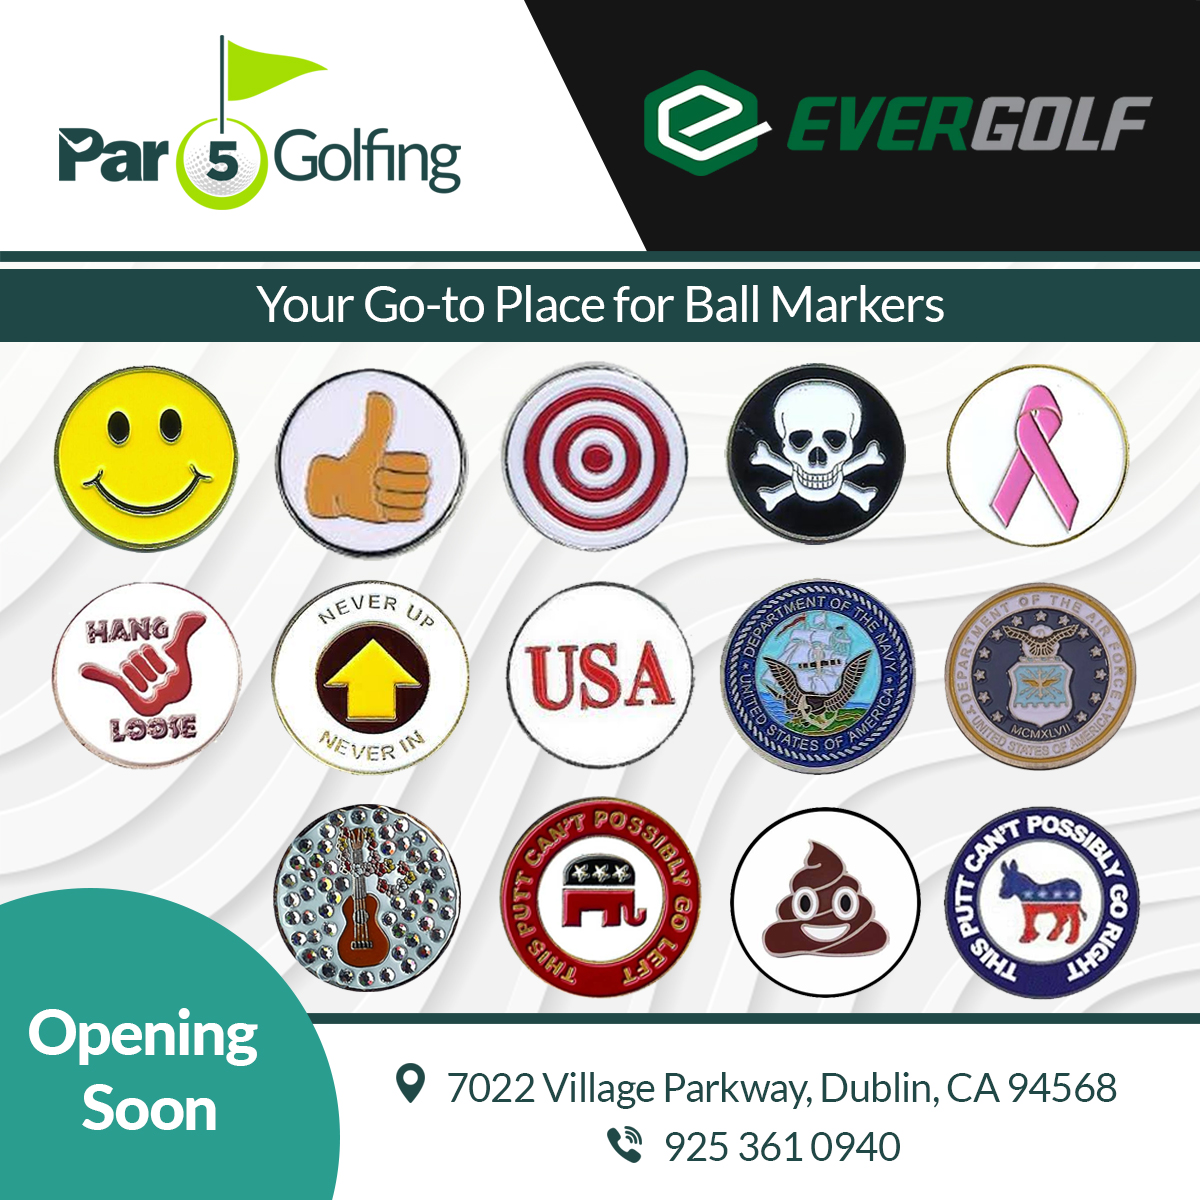 #Par5Golfing is going to be your primary go-to shop for #EverGolf and other #ballmarkers in Dublin, CA. Opening soon. Stay tuned! 

#golf #golfing #golfevent #golftravel #golfclub #golfpro #golfer #golffun #golftraining #golfstore #PGA #tour #masters